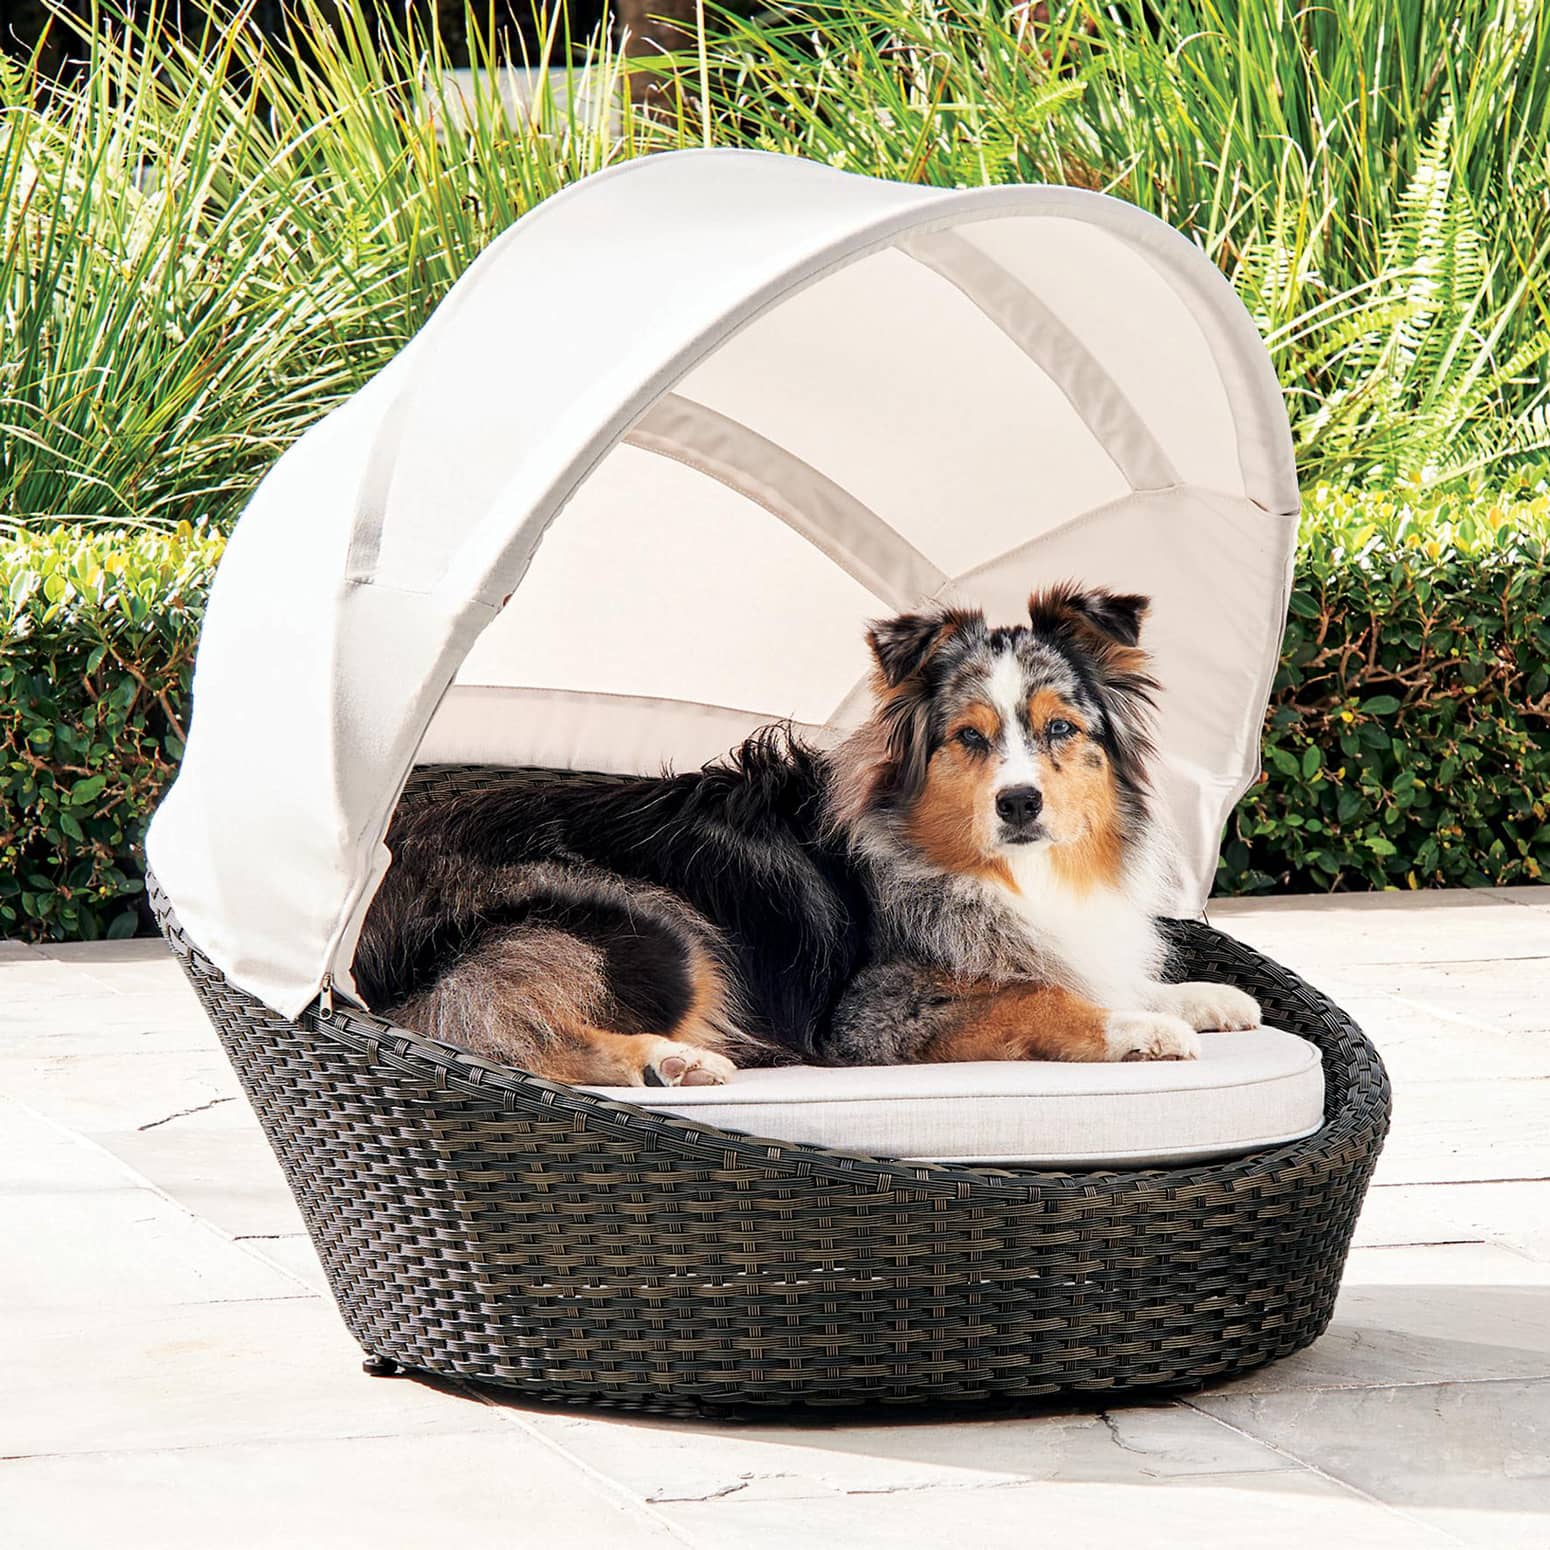 Luxurious Outdoor Dog Bed With Canopy, Outdoor Bed With Canopy For Dogs